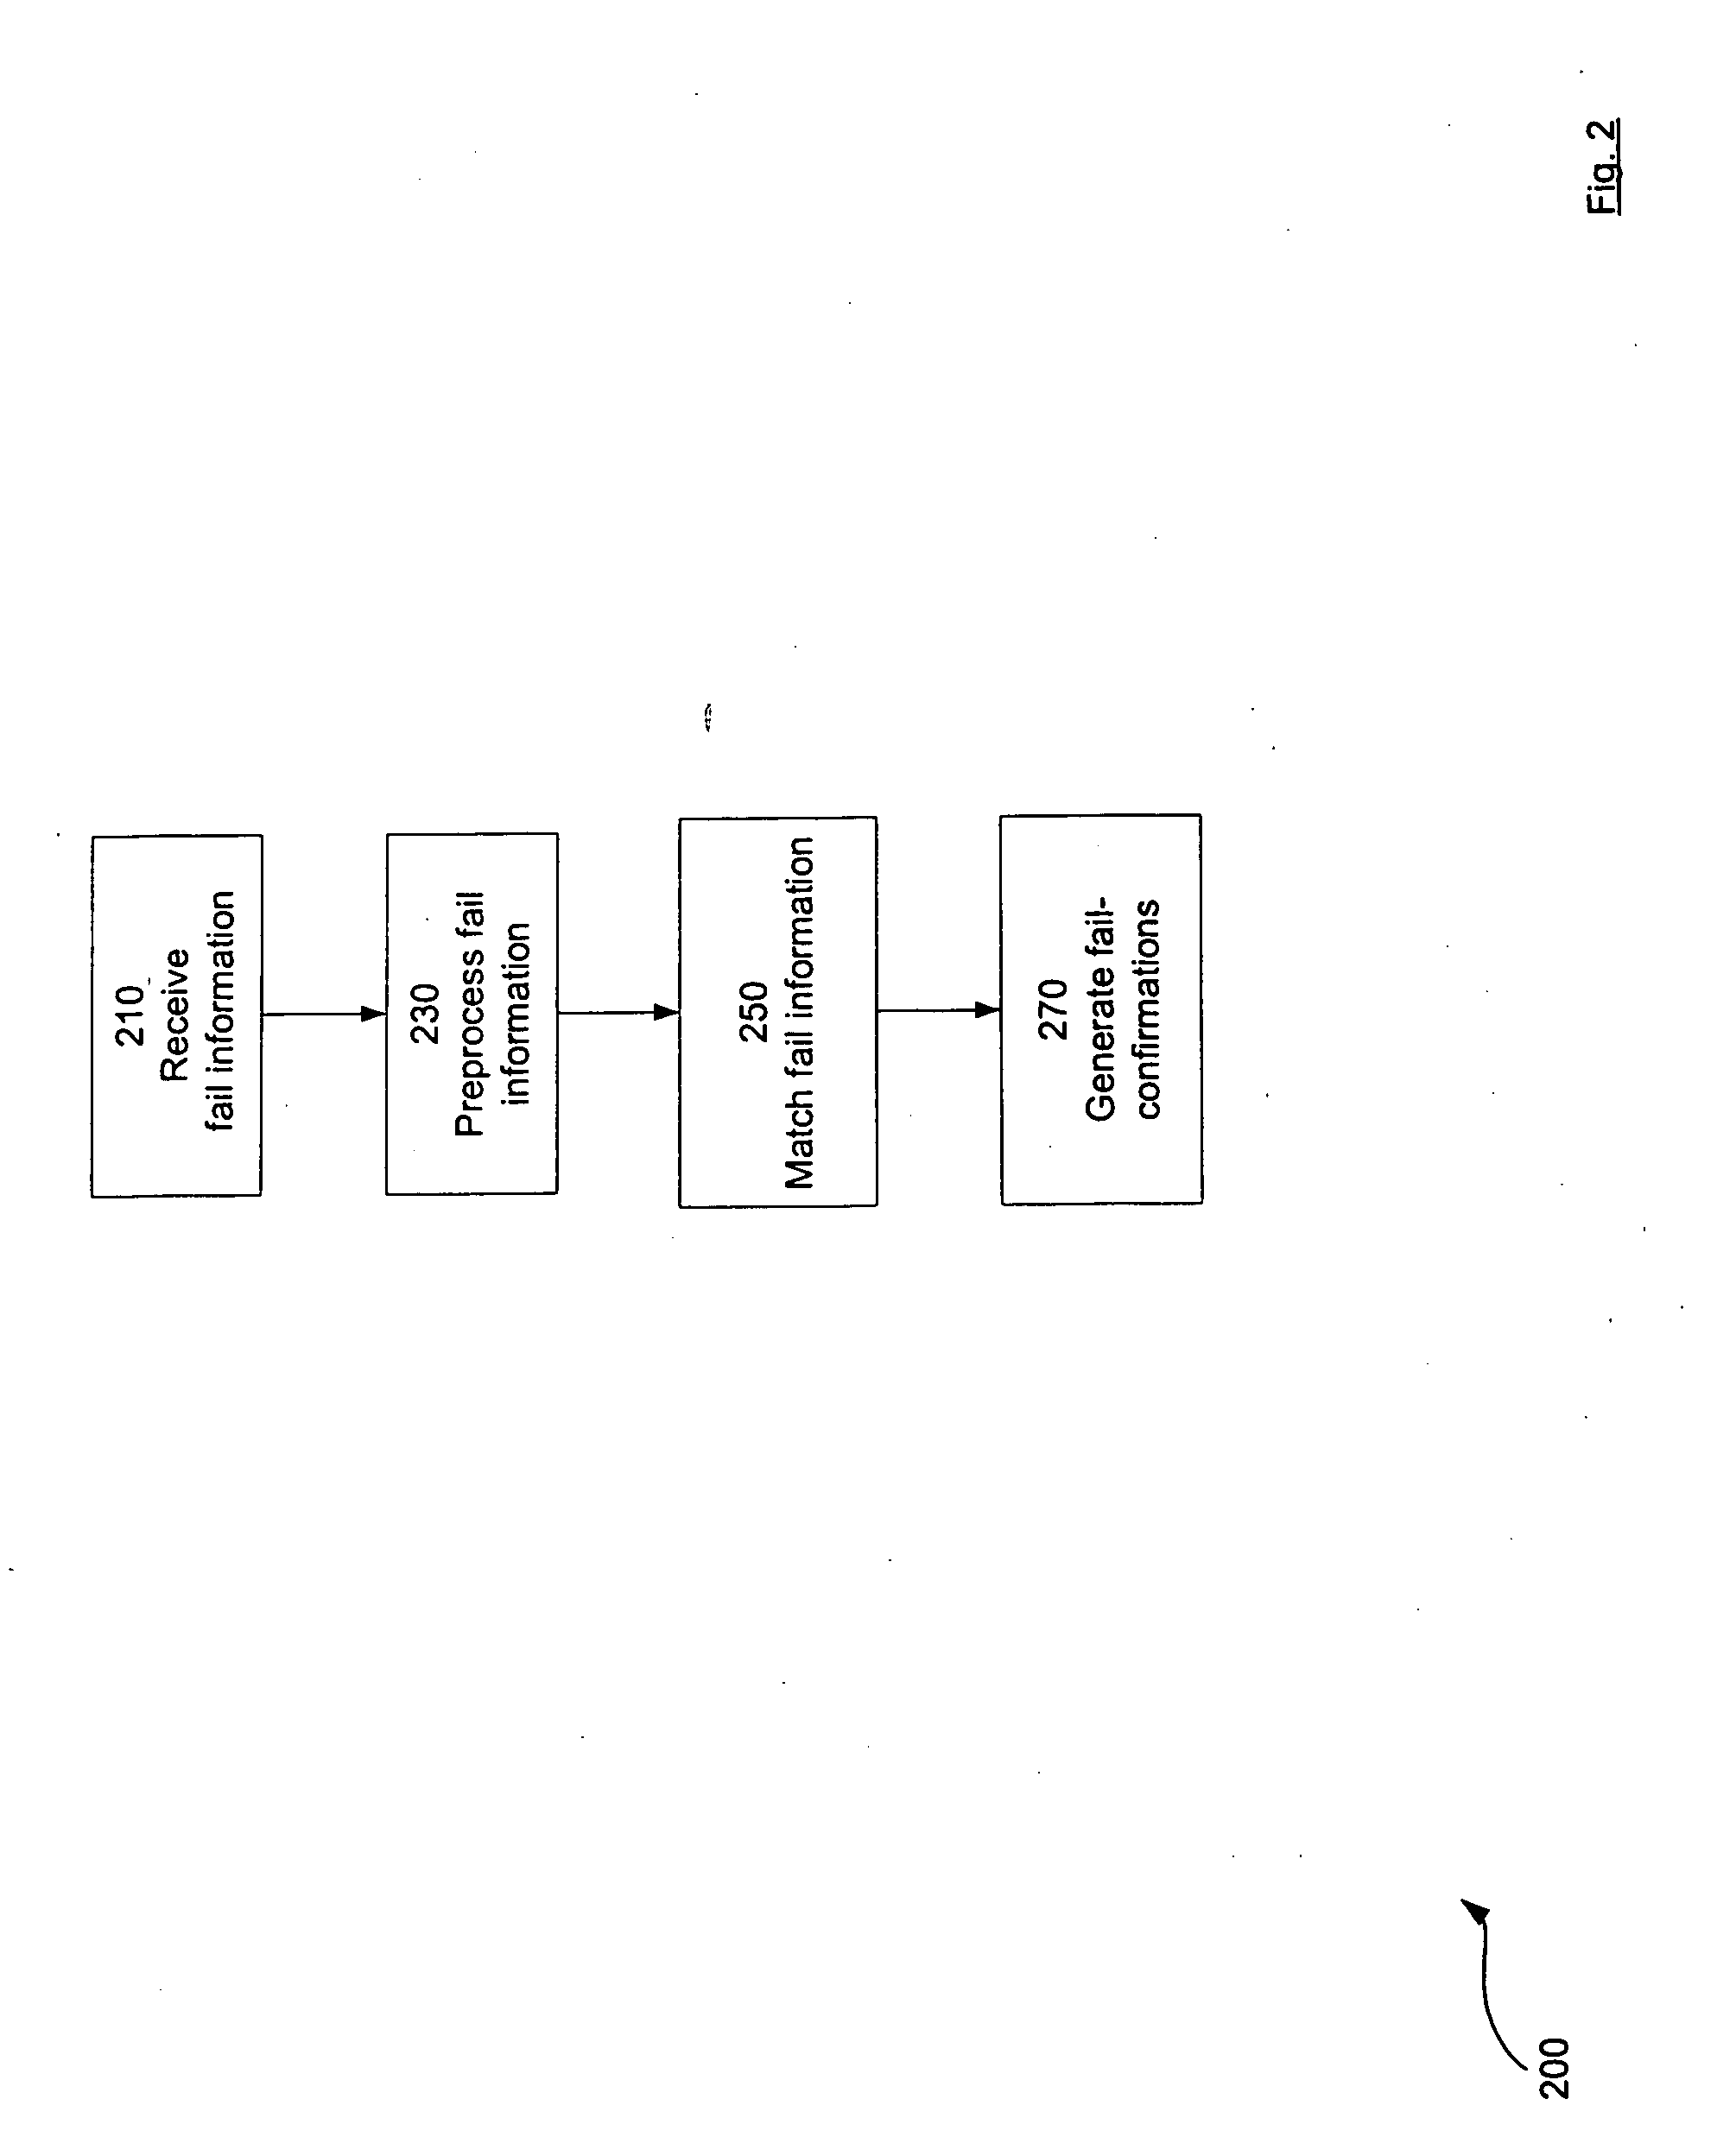 Computer-based system and method for confirming failed trades of securities